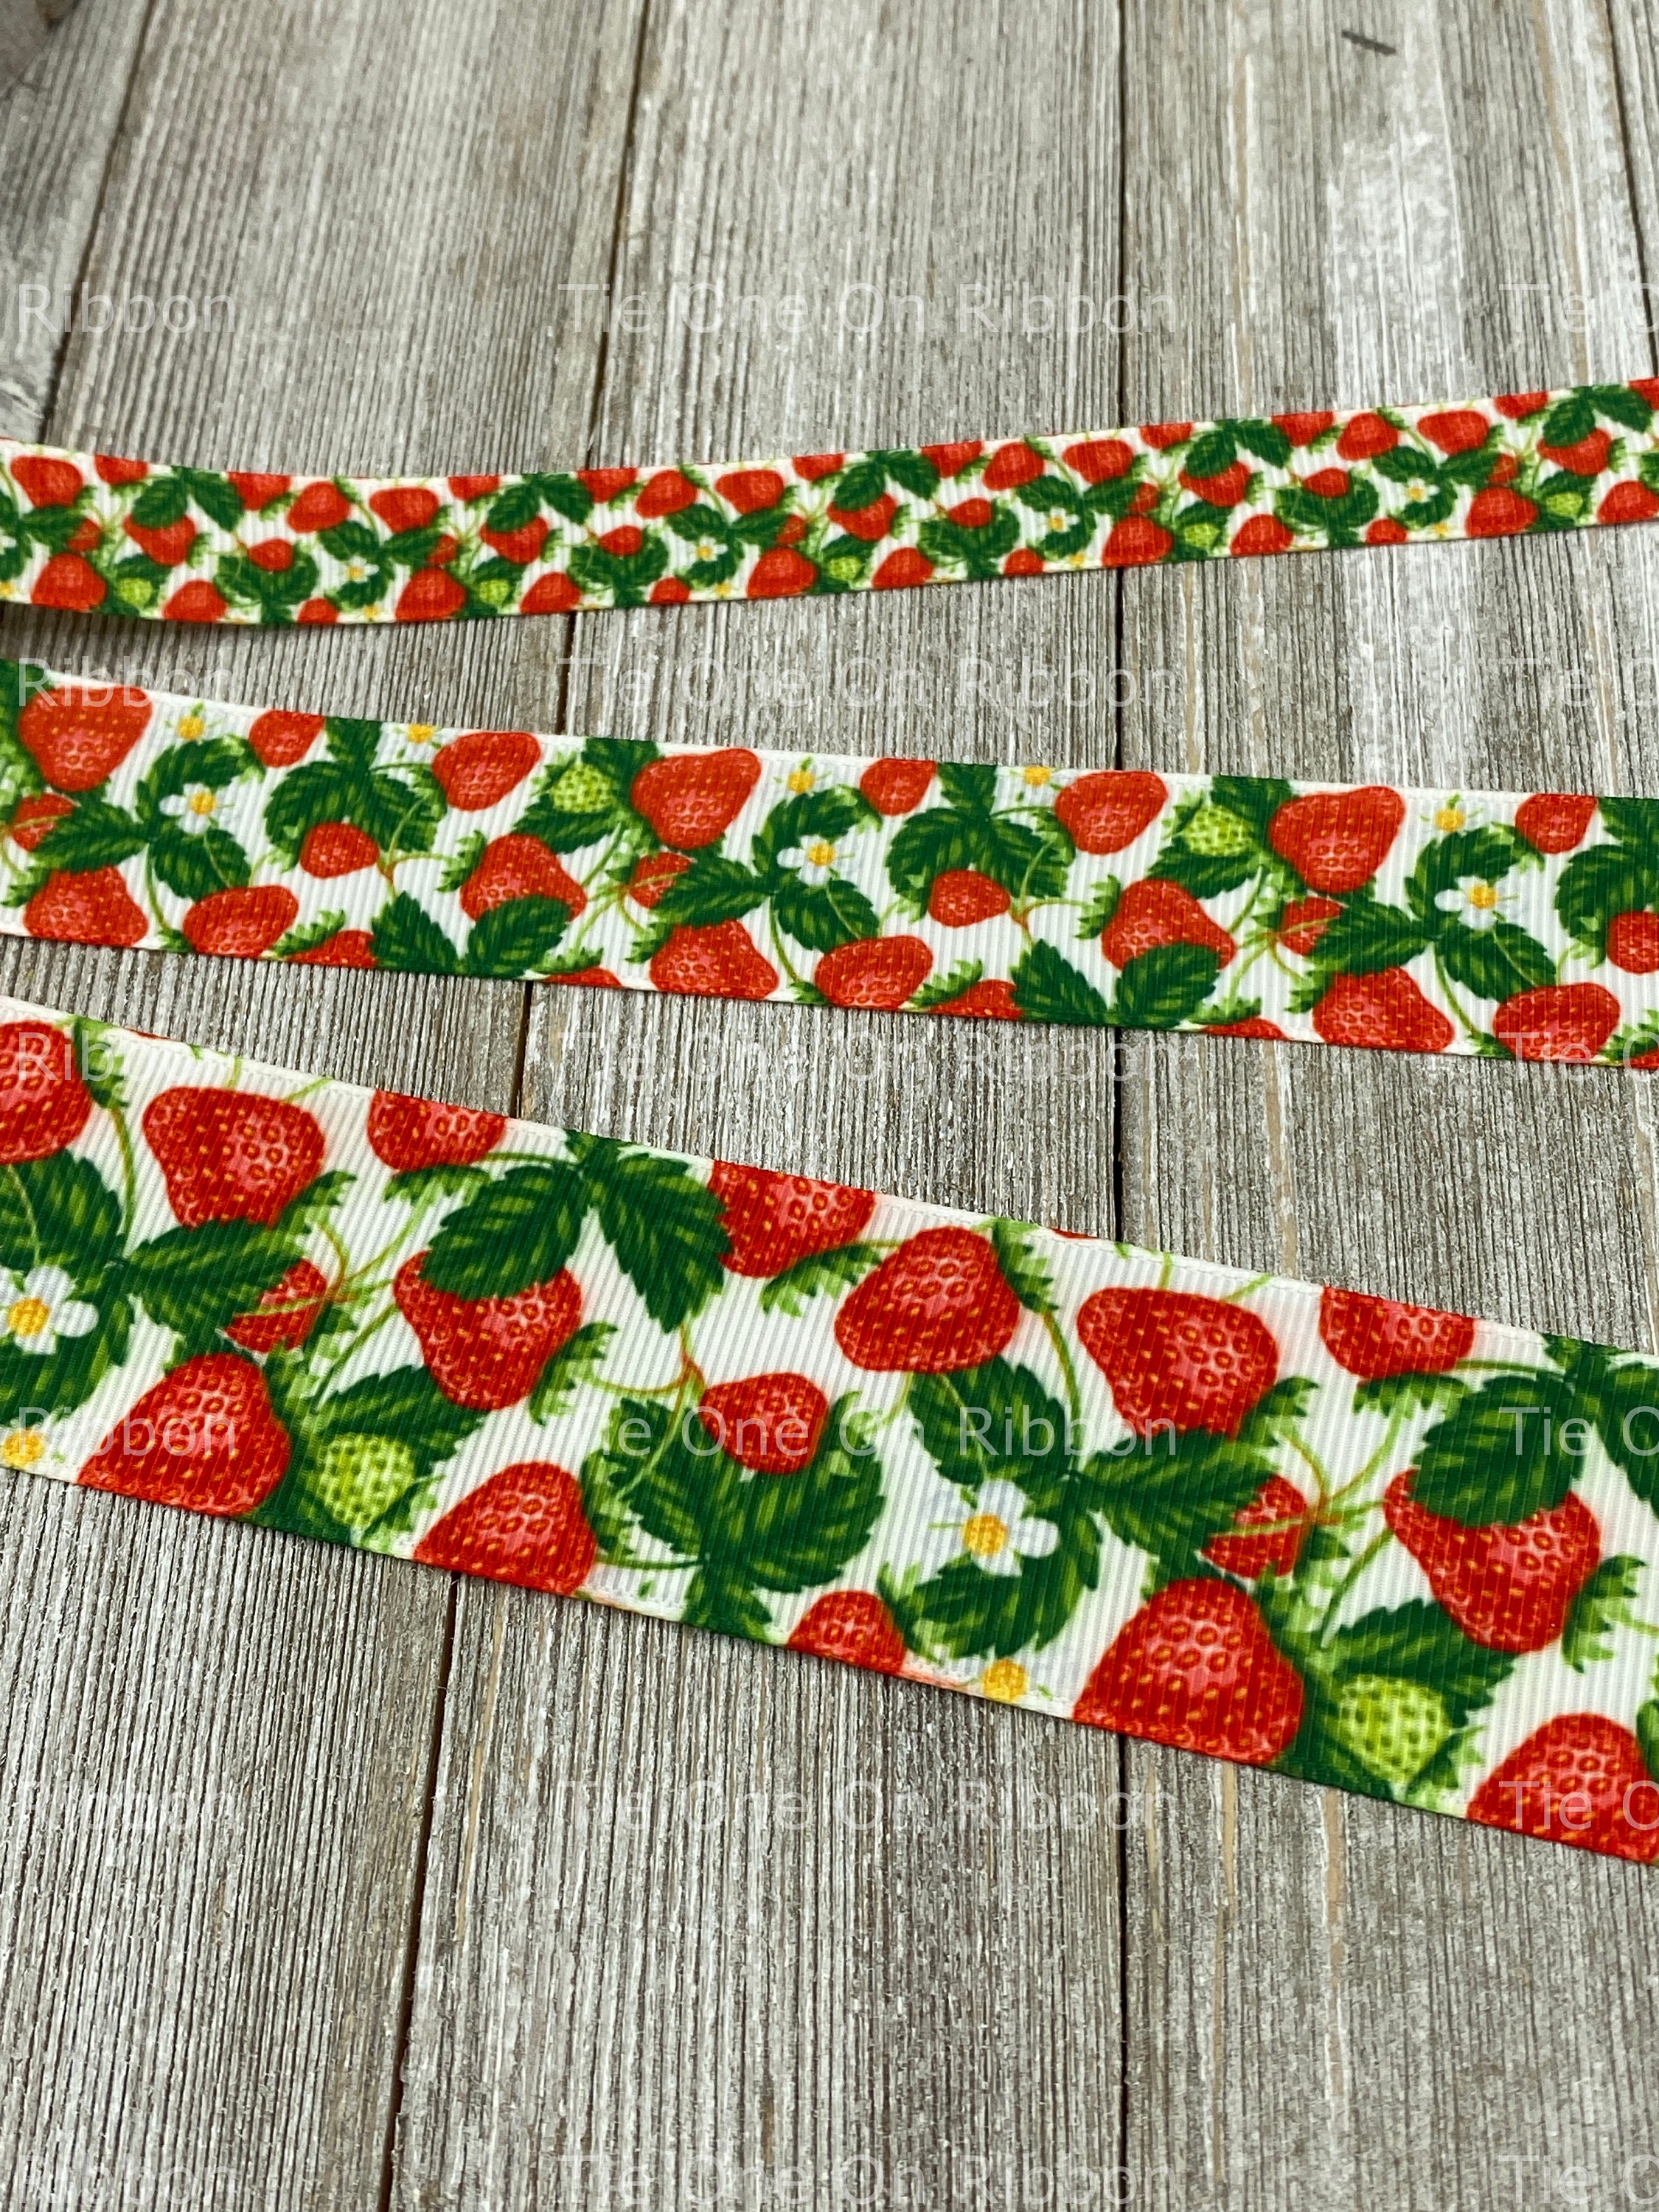 Strawberries Ribbon with white flowers on a blue background on 5/8